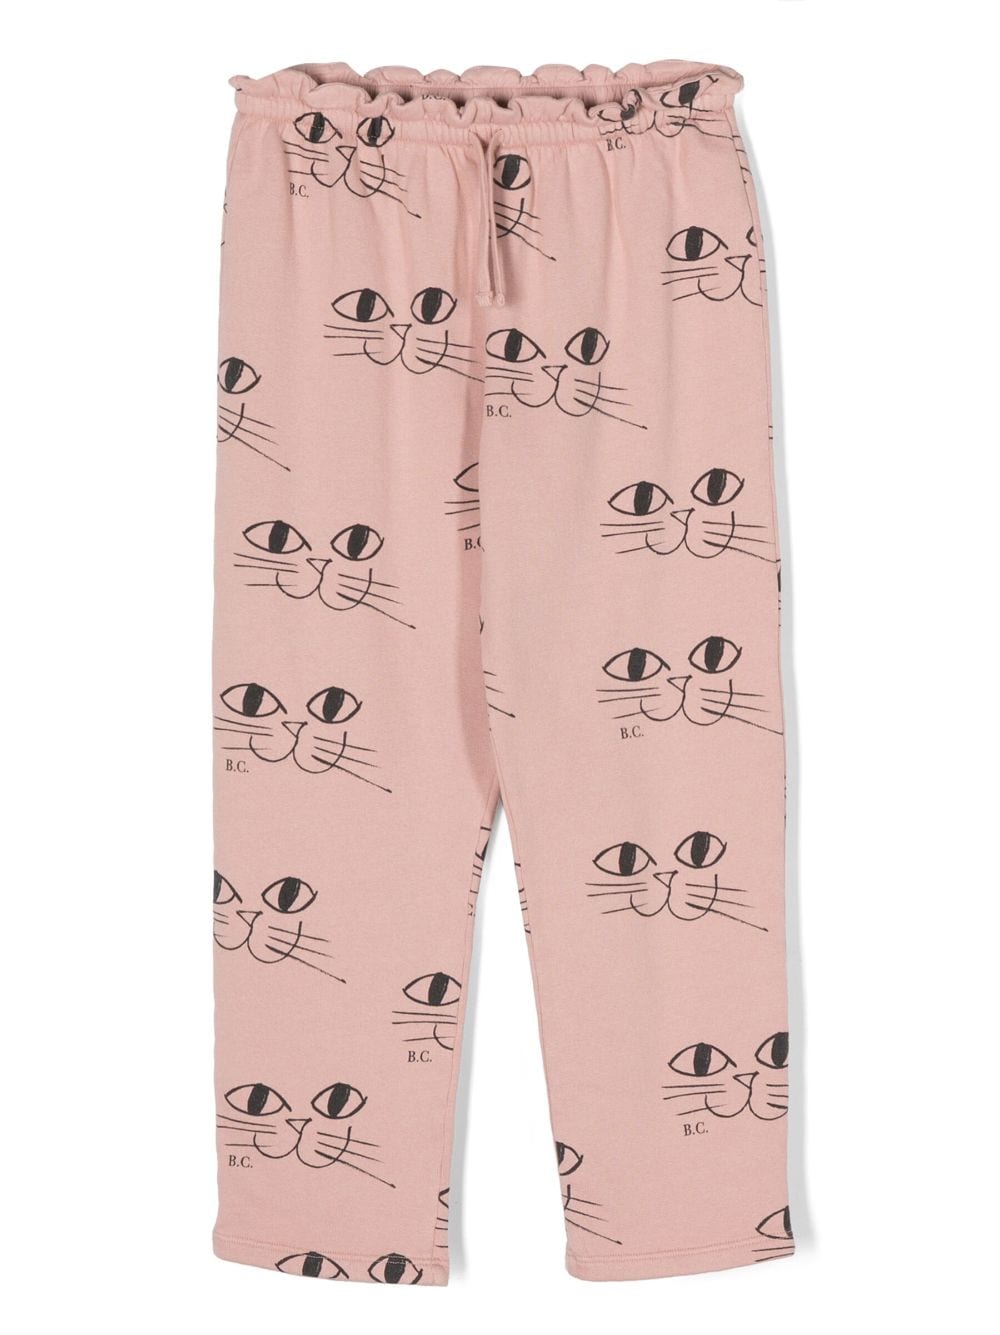 Bobo Choses Kids' Smiling Cat Organic Cotton Trousers In Pink